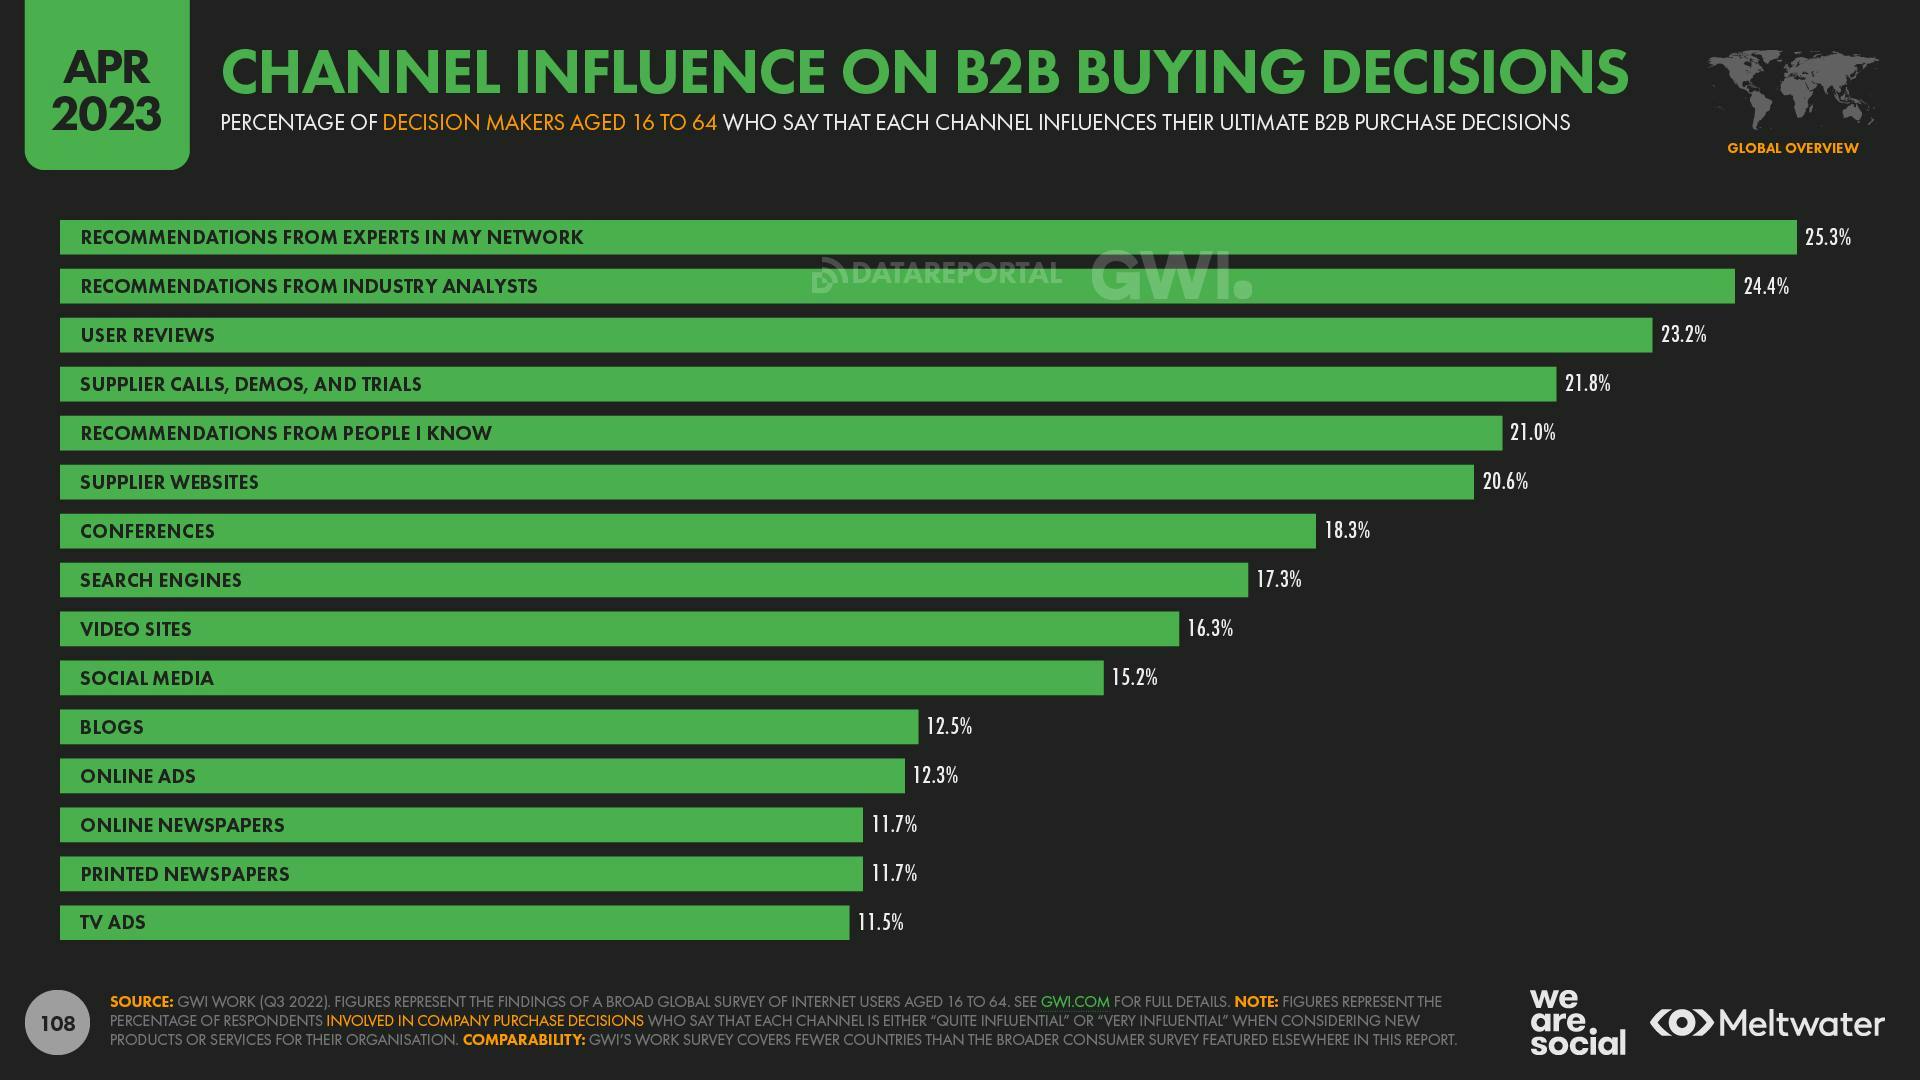 April 2023 Global State of Digital Report: Channel Influence on B2B Buying Decisions